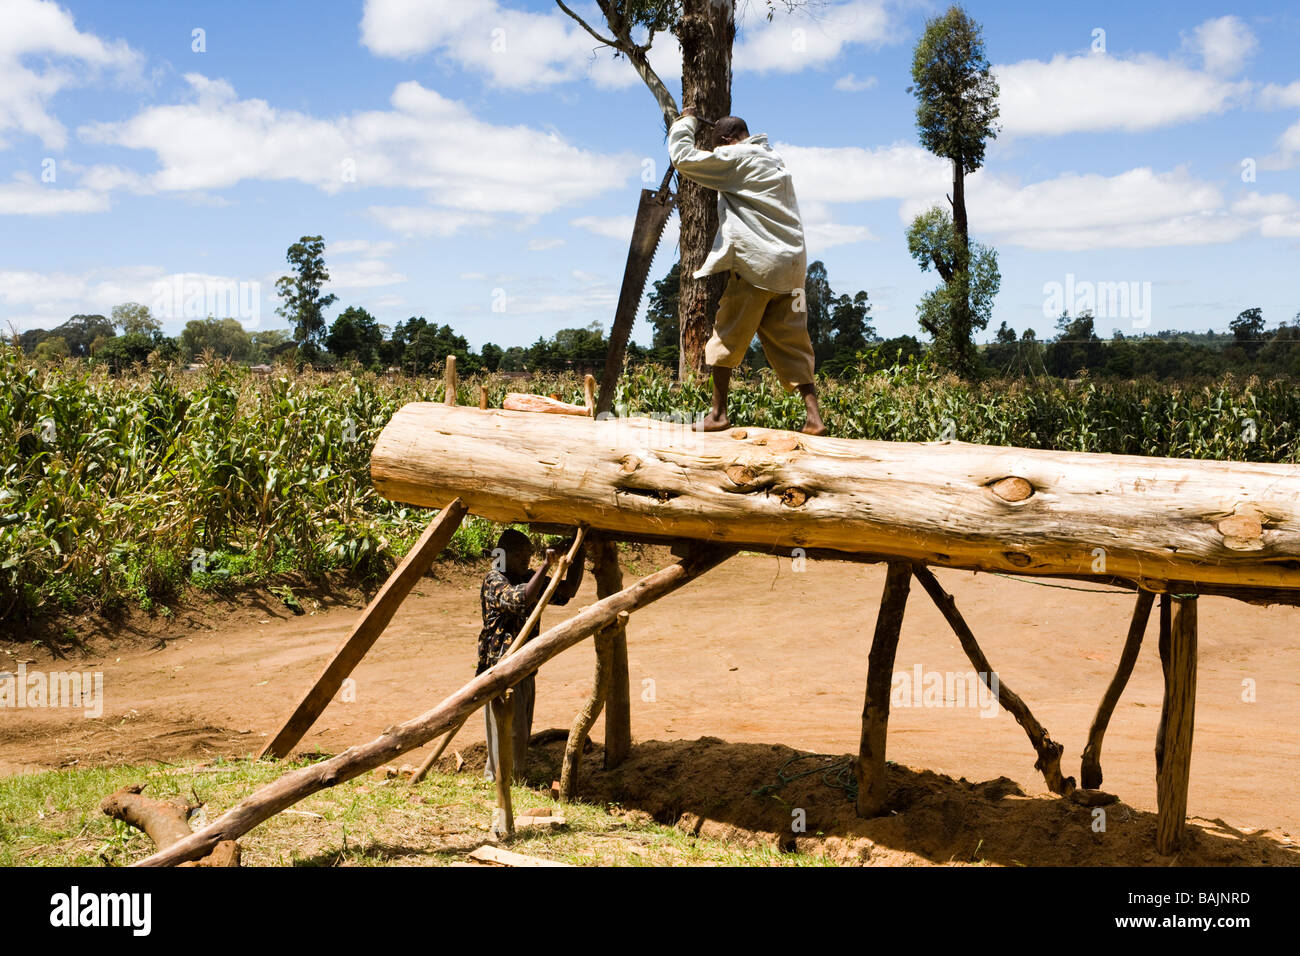 Pit sawing a log at Dedza, Malawi, Africa Stock Photo